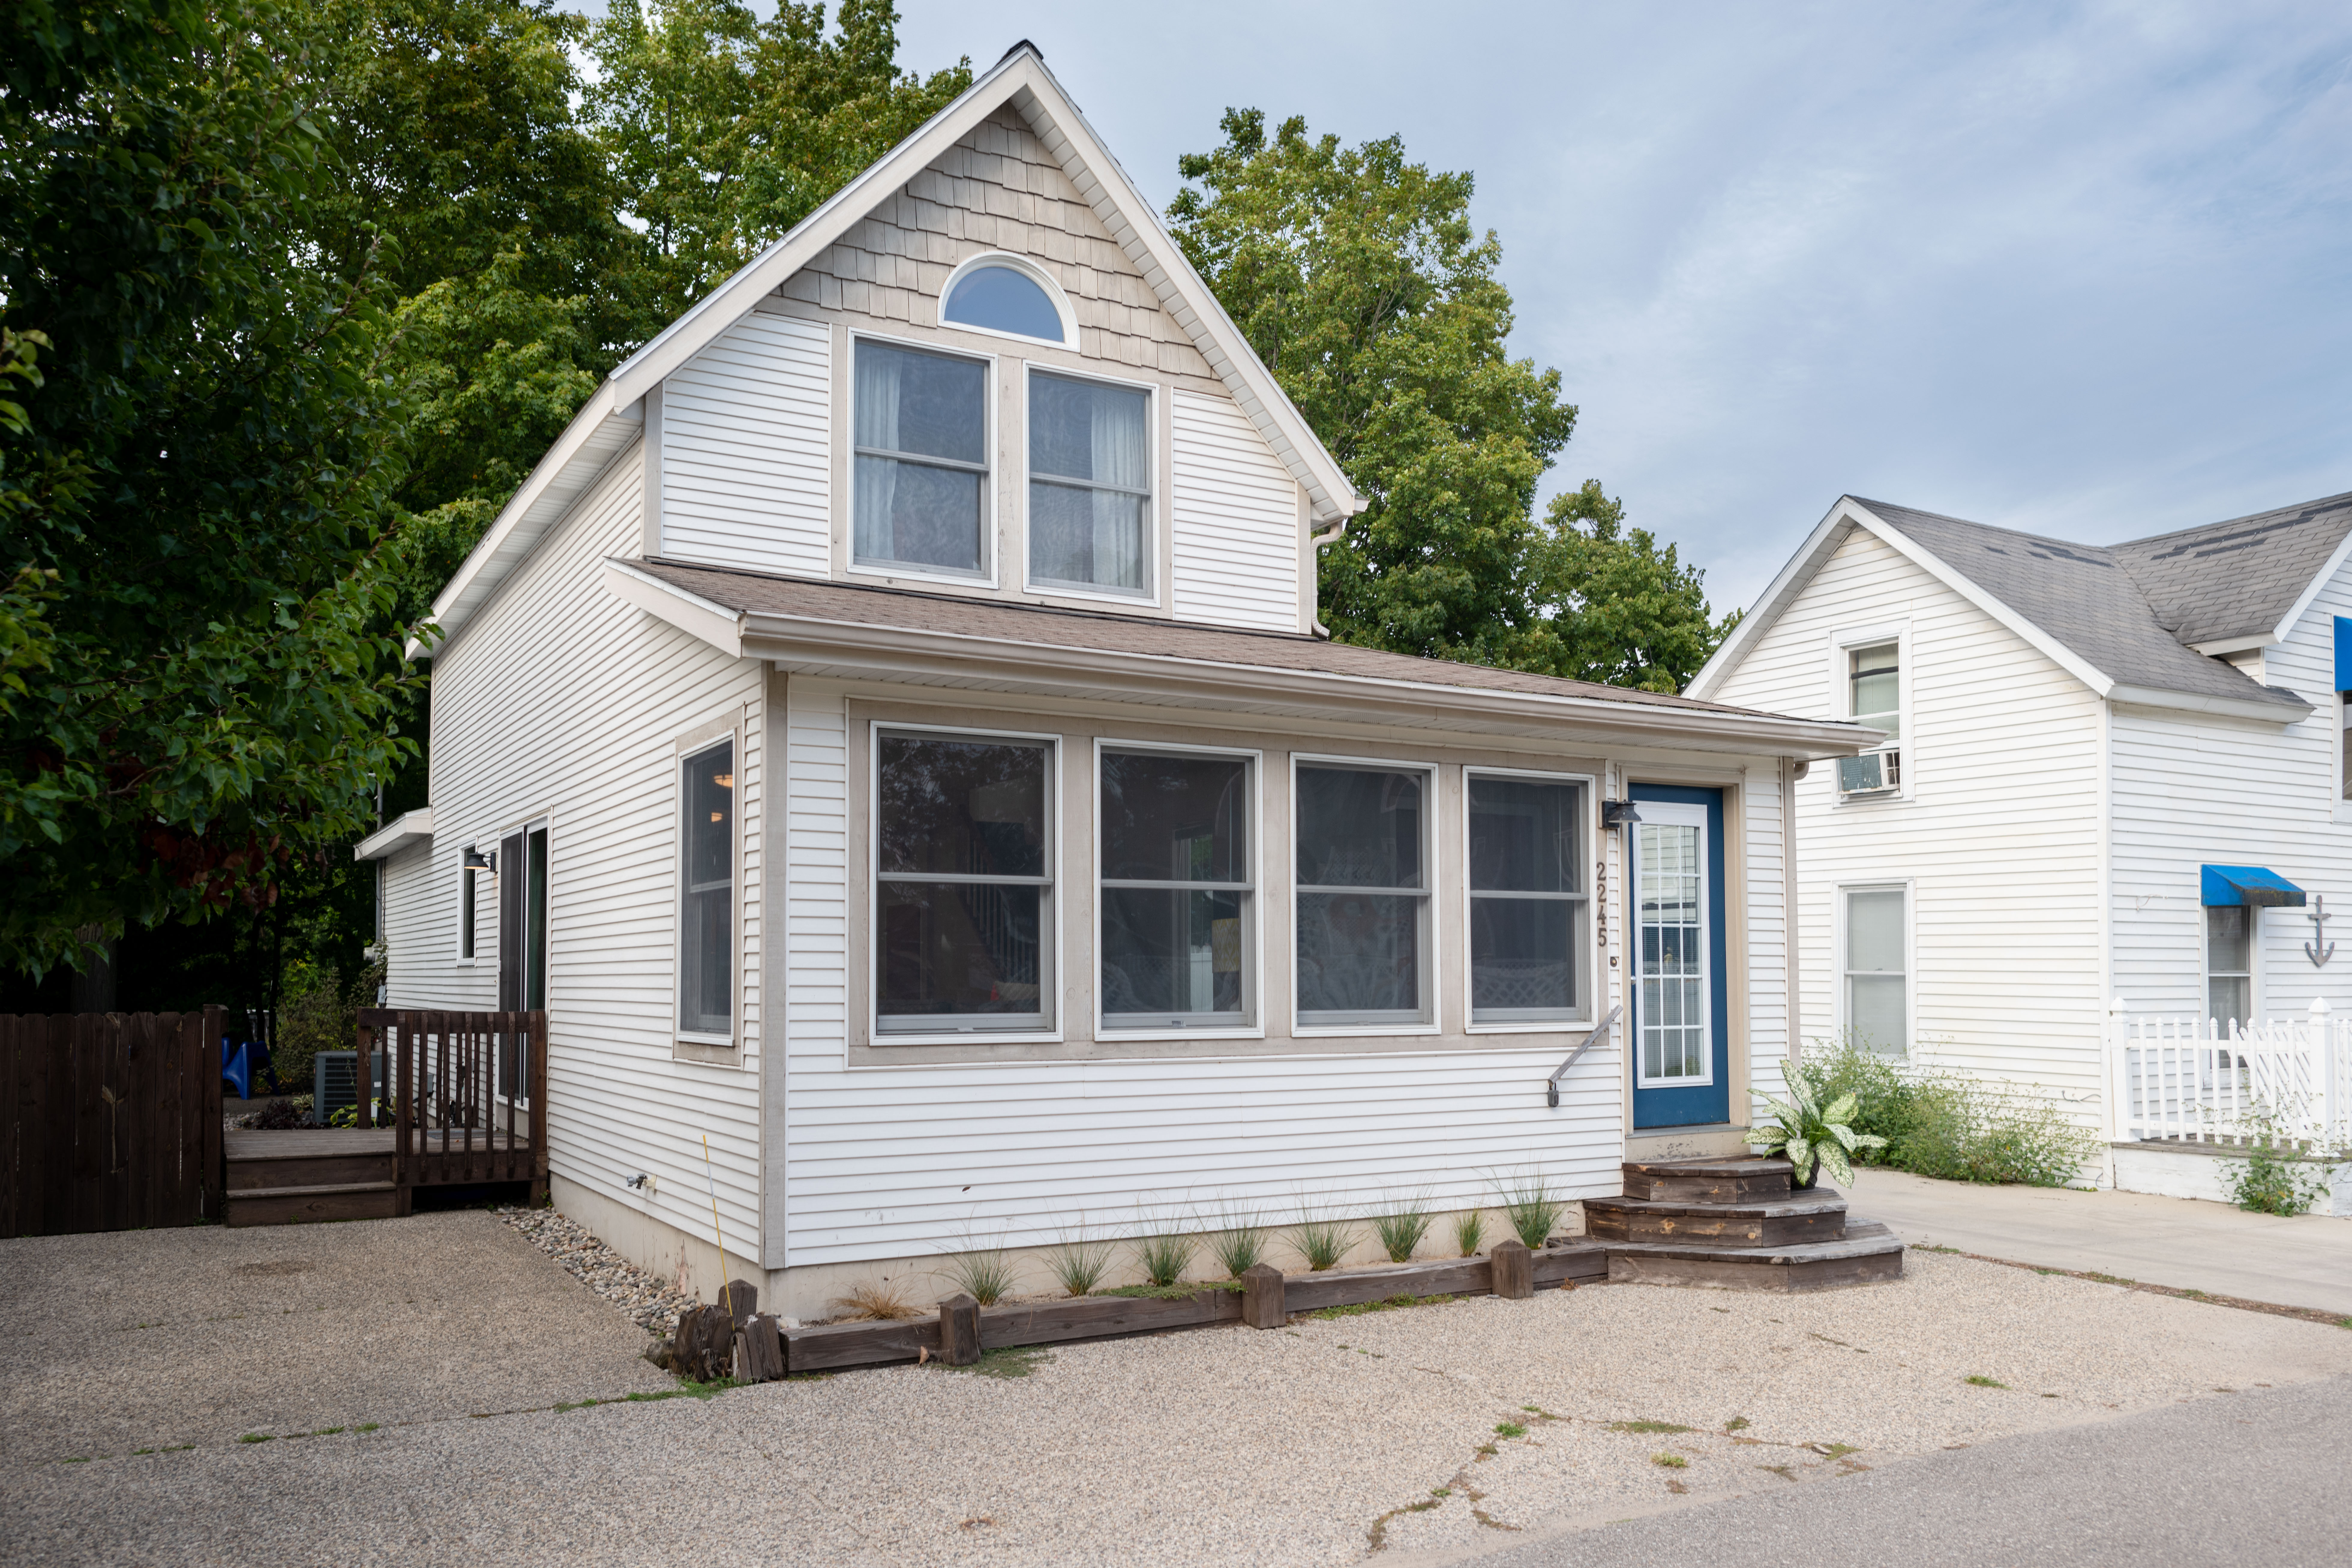 A cozy cottage within walking distance to the Holland State Park beach, hiking, ice cream shops, and Lake Macatawa.